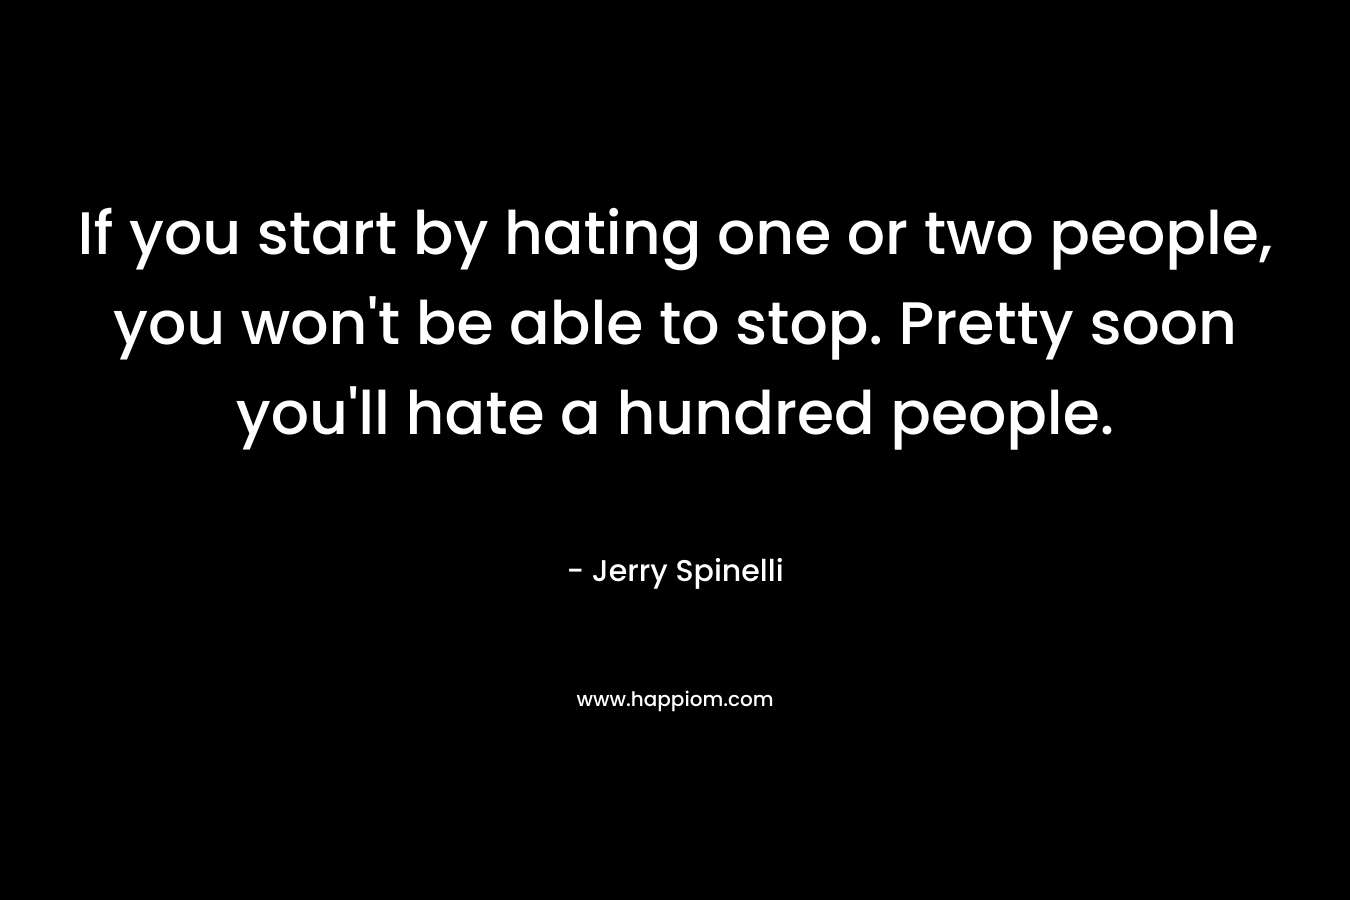 If you start by hating one or two people, you won’t be able to stop. Pretty soon you’ll hate a hundred people. – Jerry Spinelli